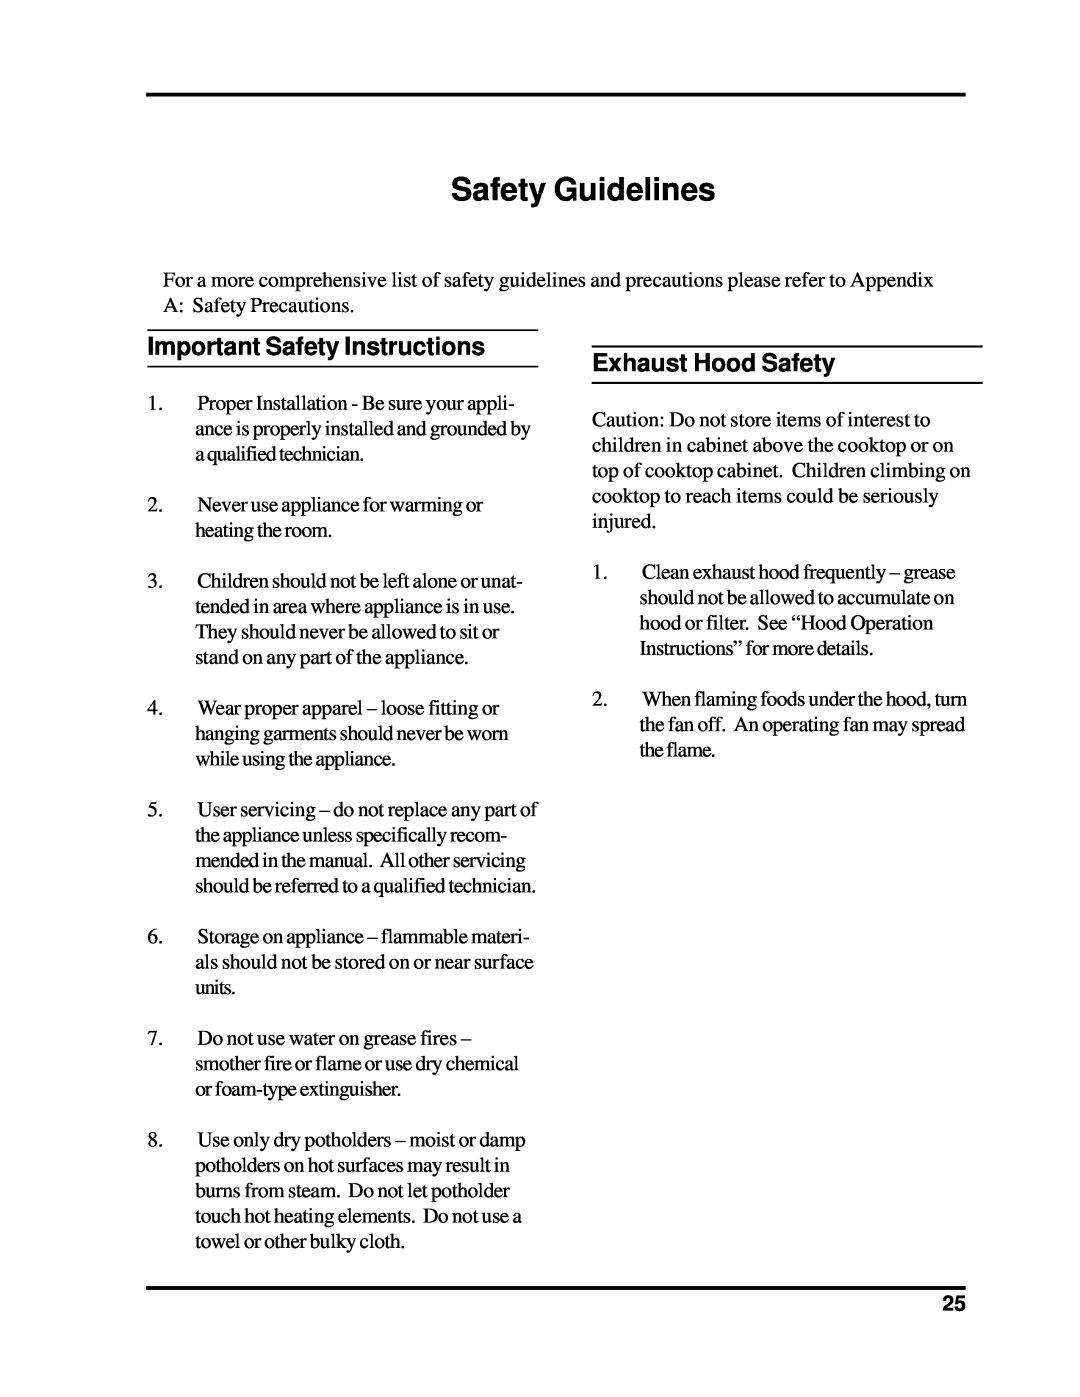 Heartland Bakeware 3805-3825, 3800-3820 manual Safety Guidelines, Important Safety Instructions, Exhaust Hood Safety 